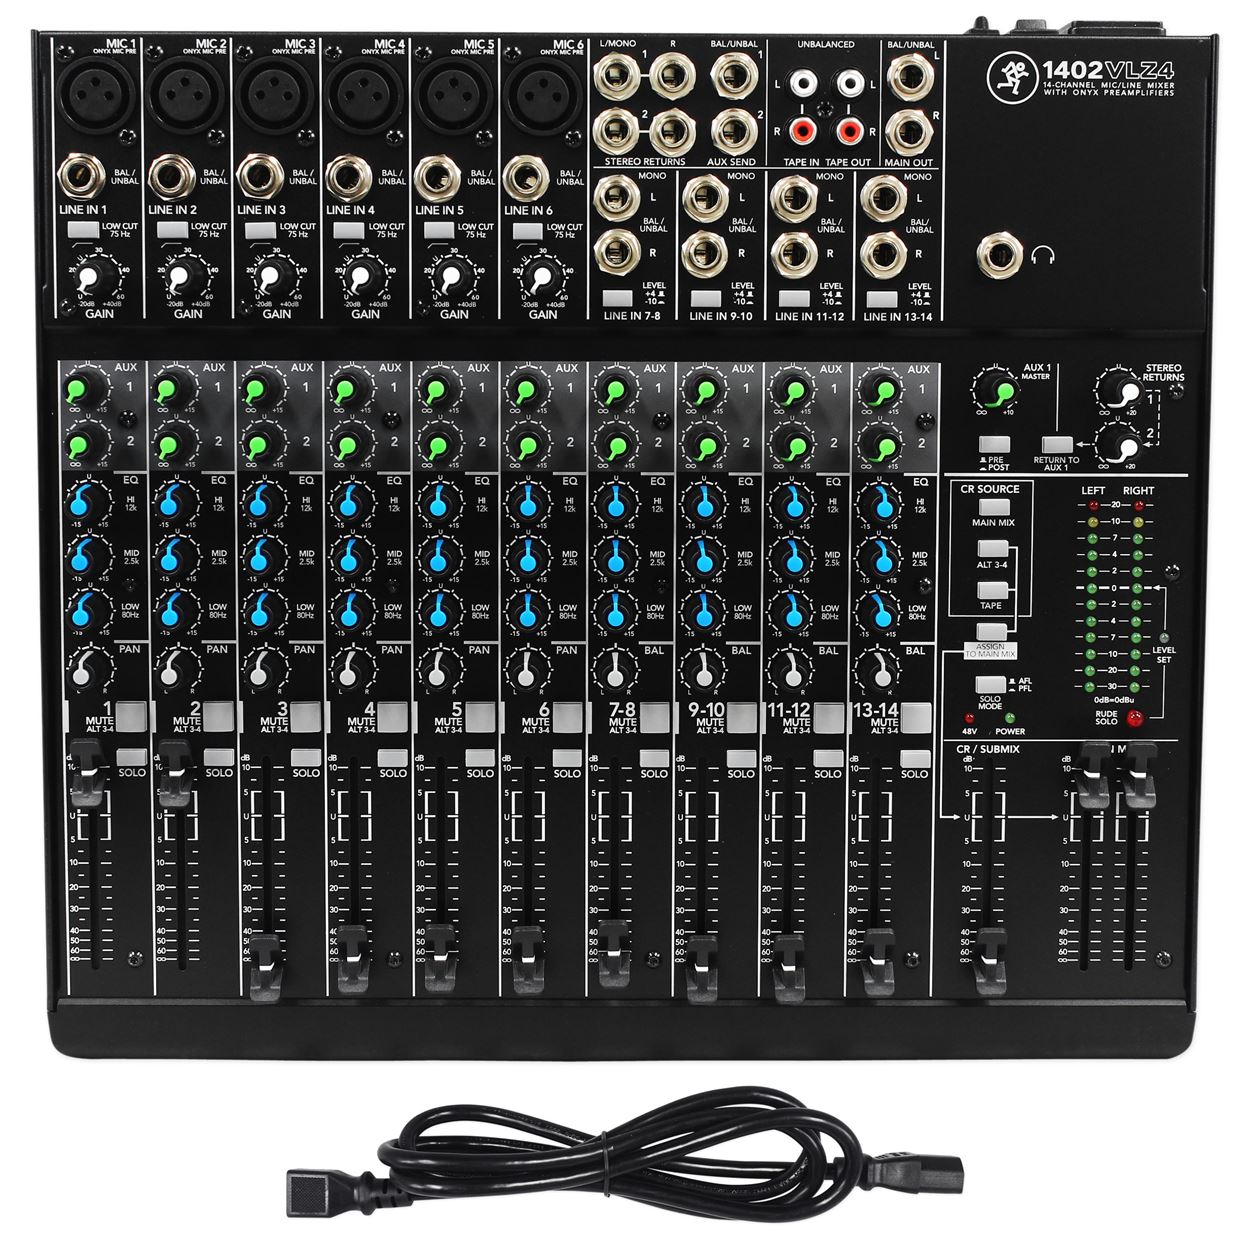 Mackie 1402VLZ4 14-ch Analog Low-Noise Mixer w/ 6 ONYX Preamps+Headphones+Cables - image 2 of 10